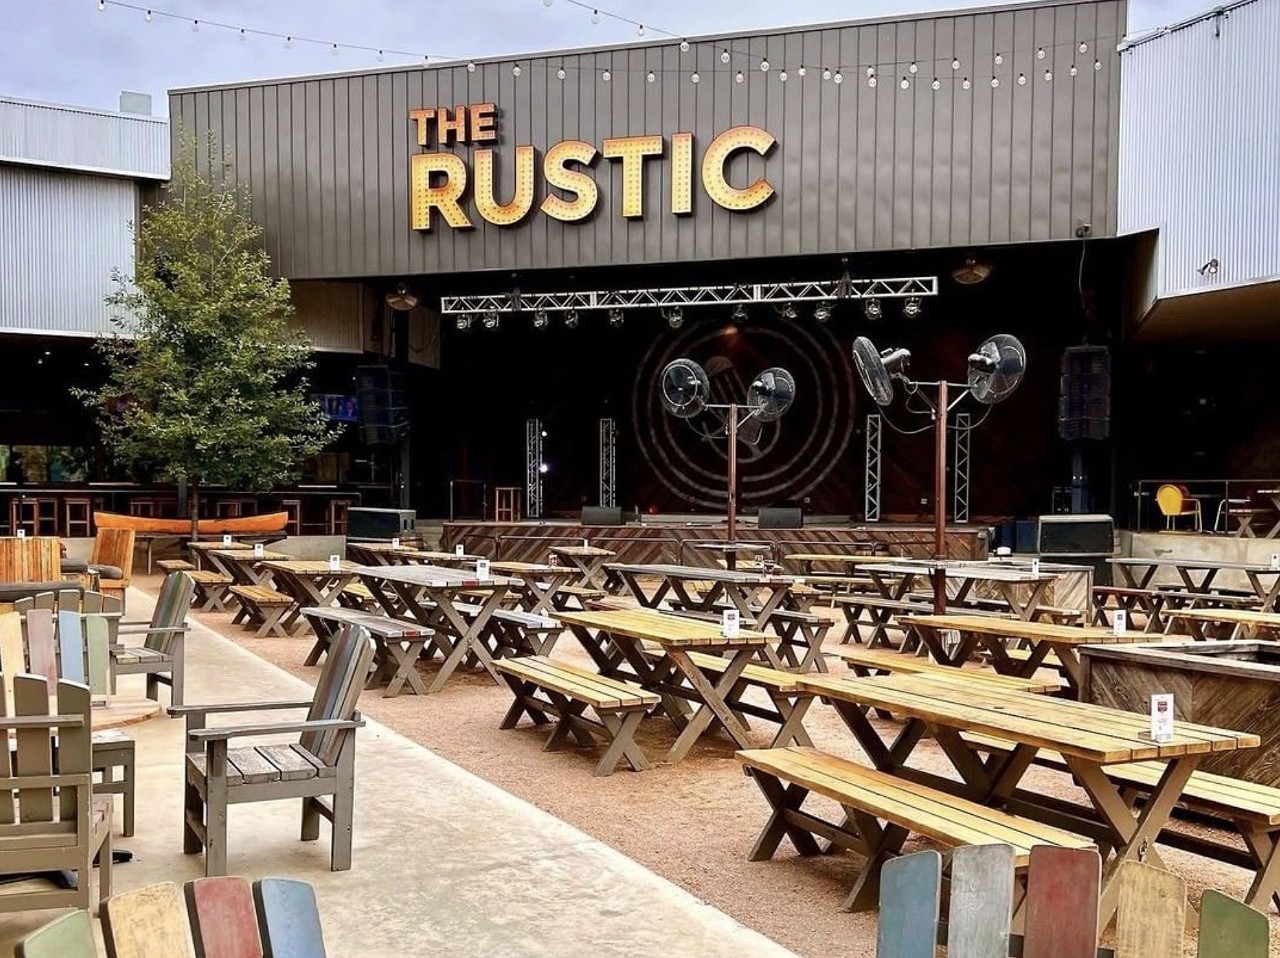 The Rustic
17619 La Cantera Parkway, #04, (210) 245-7500, therustic.com/san-antonio
Sitting right outside of the loop, The Rustic offers live music, a huge outdoor seating area and a diverse food menu.
Photo via Instagram / therusticsa